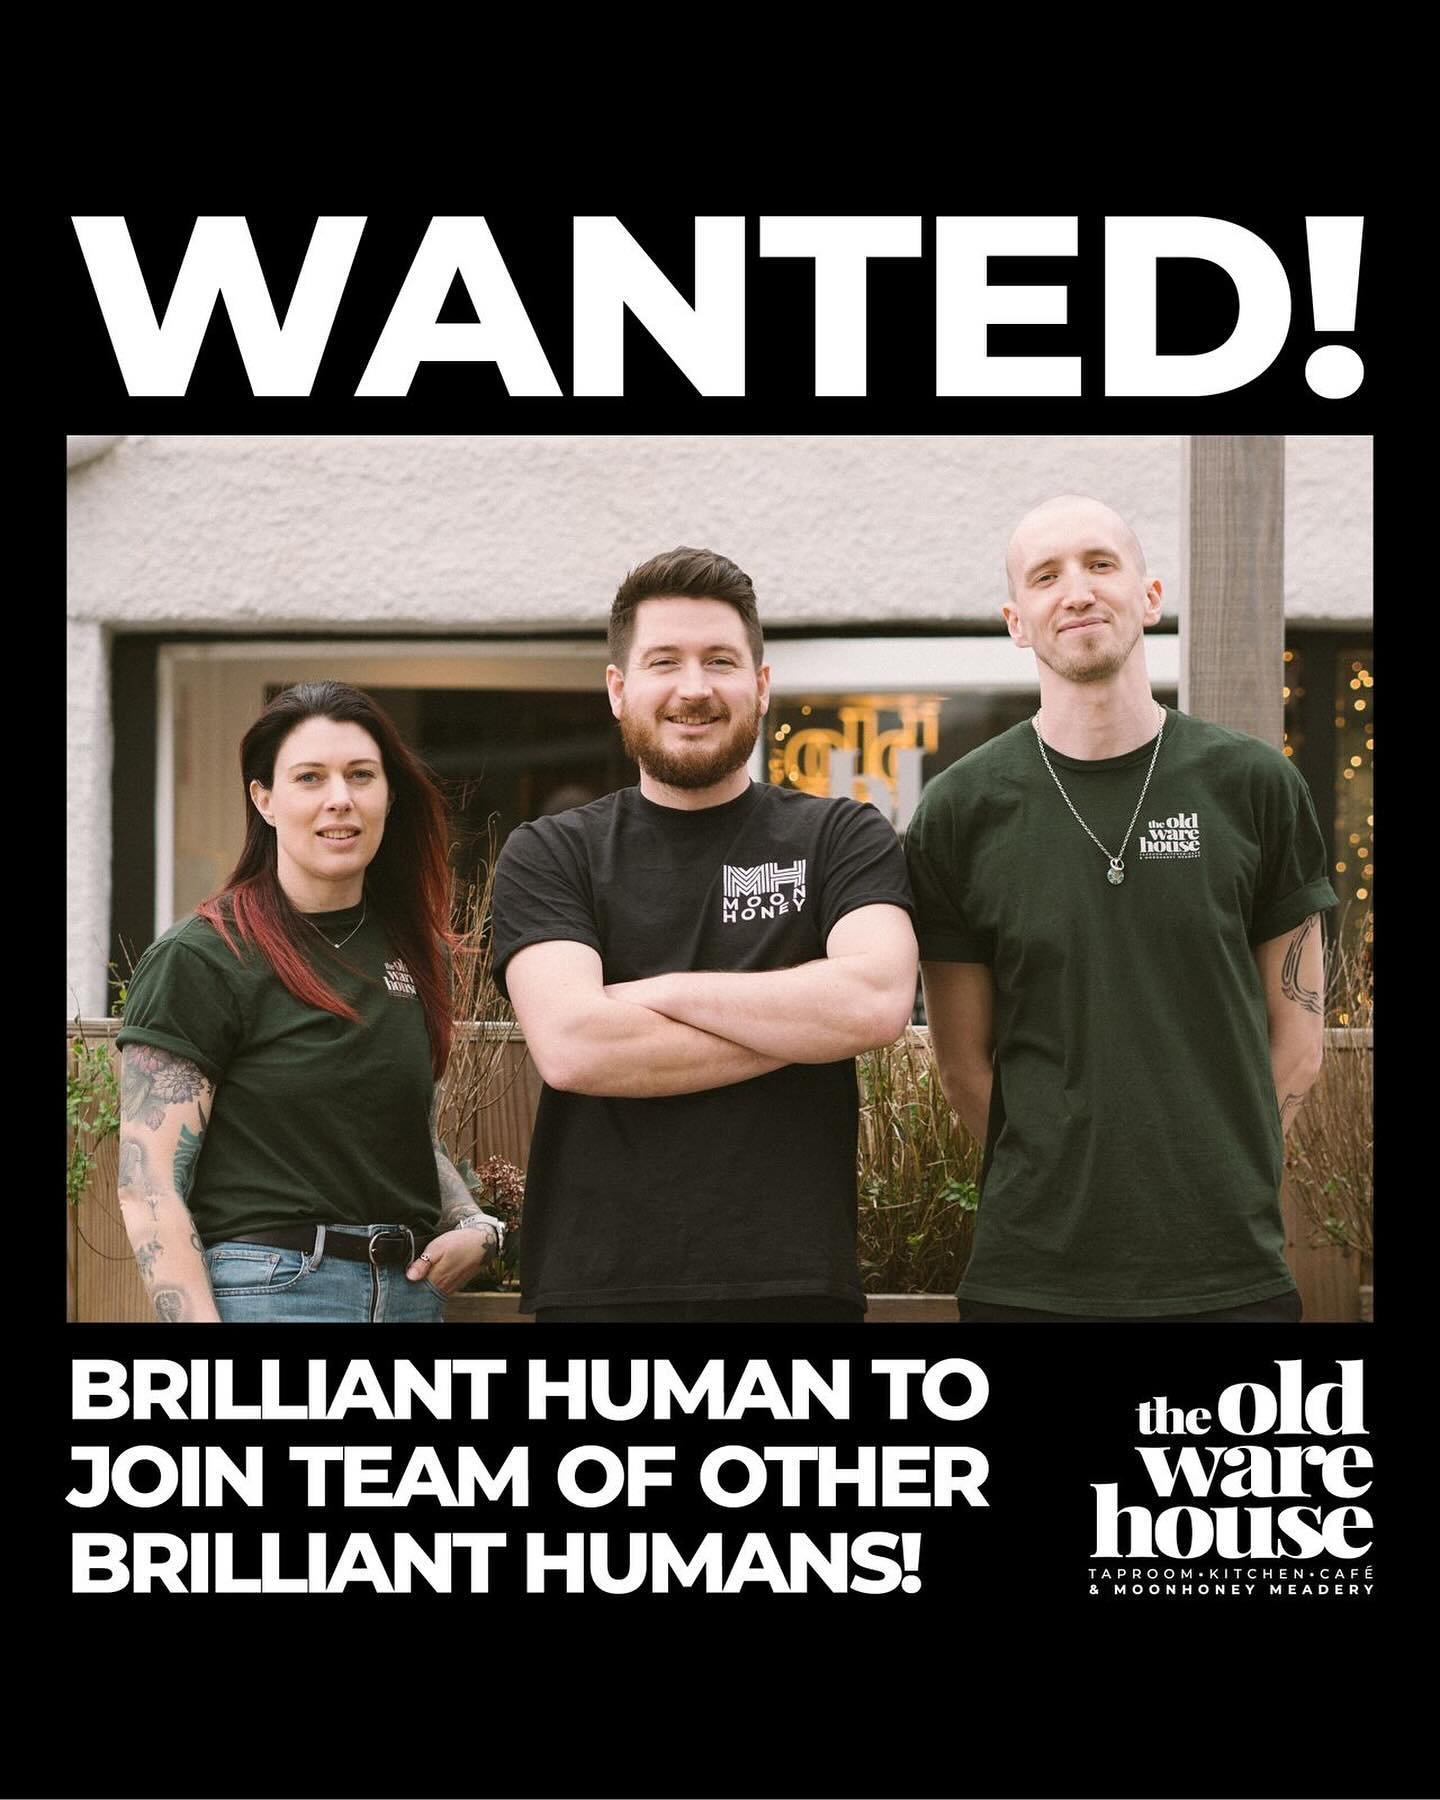 WANTED&hellip;BRILLIANT HUMAN TO JOIN TEAM OF OTHER BRILLIANT HUMANS!
 
It&rsquo;s not impossible&hellip;but perhaps unlikely that YOU, the reader of this post, are a dynamic and ambitious senior sous or head chef with great cooking skills and kitc